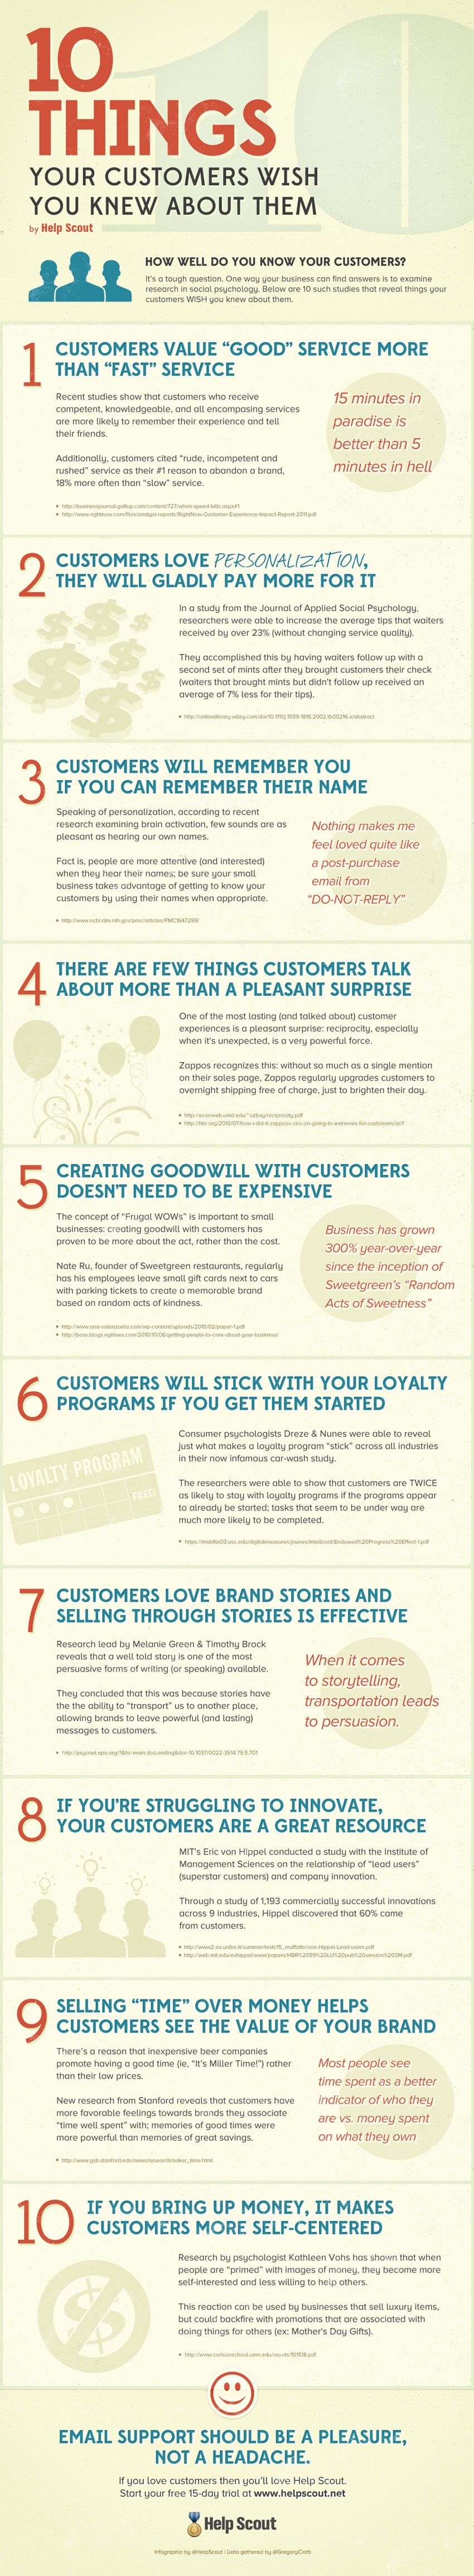 10 Things You Can Learn From Your Customers [Infographic]